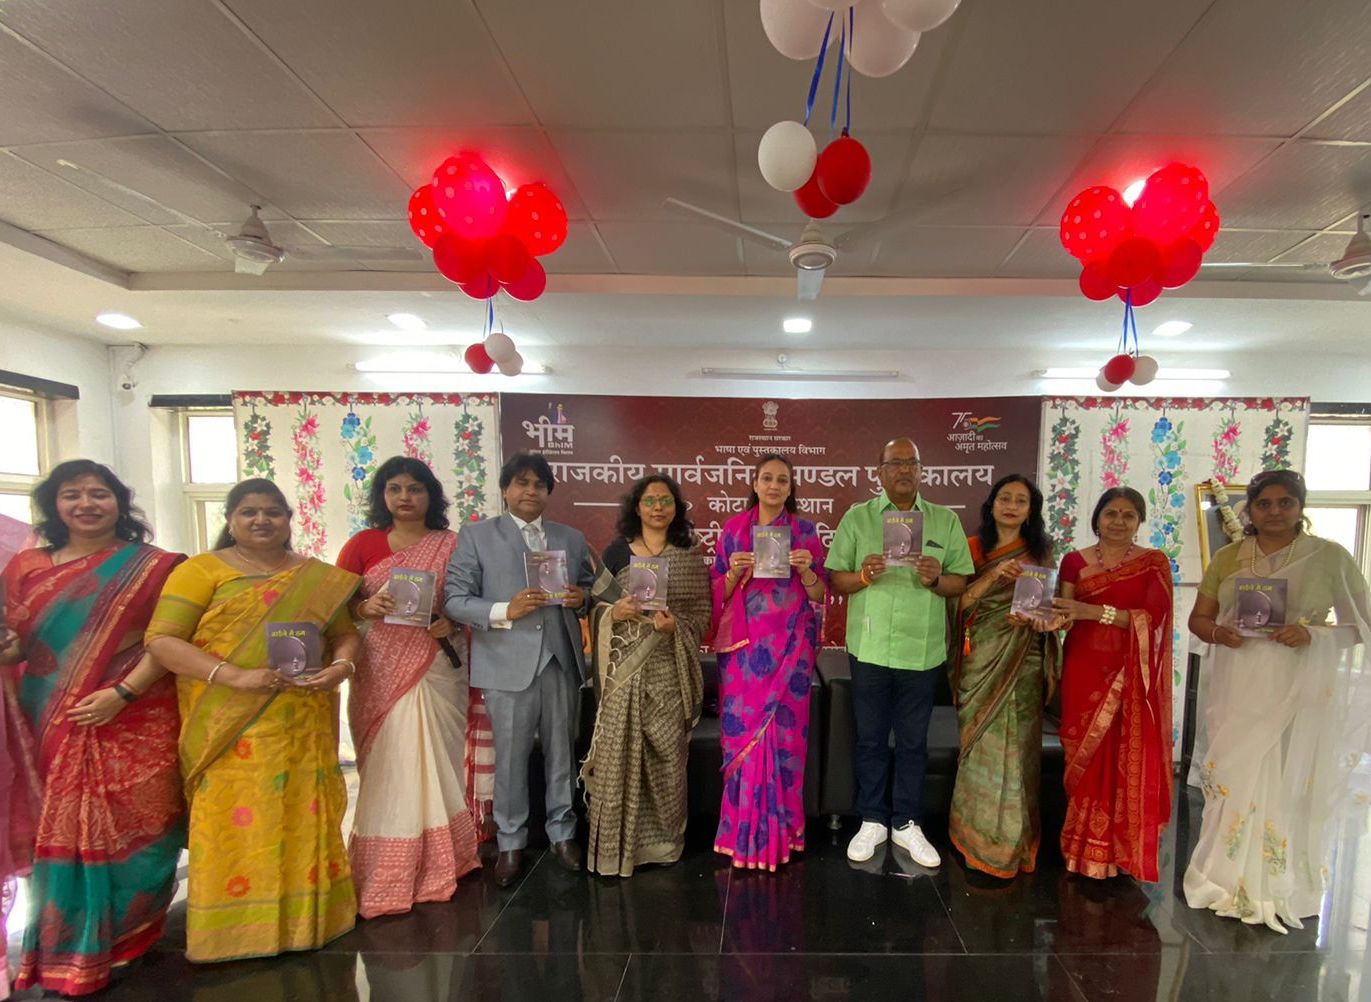 On International Women's Day, the book "Aaene Mein Hum" by literary writer Rachna God 'Bharti' was launched